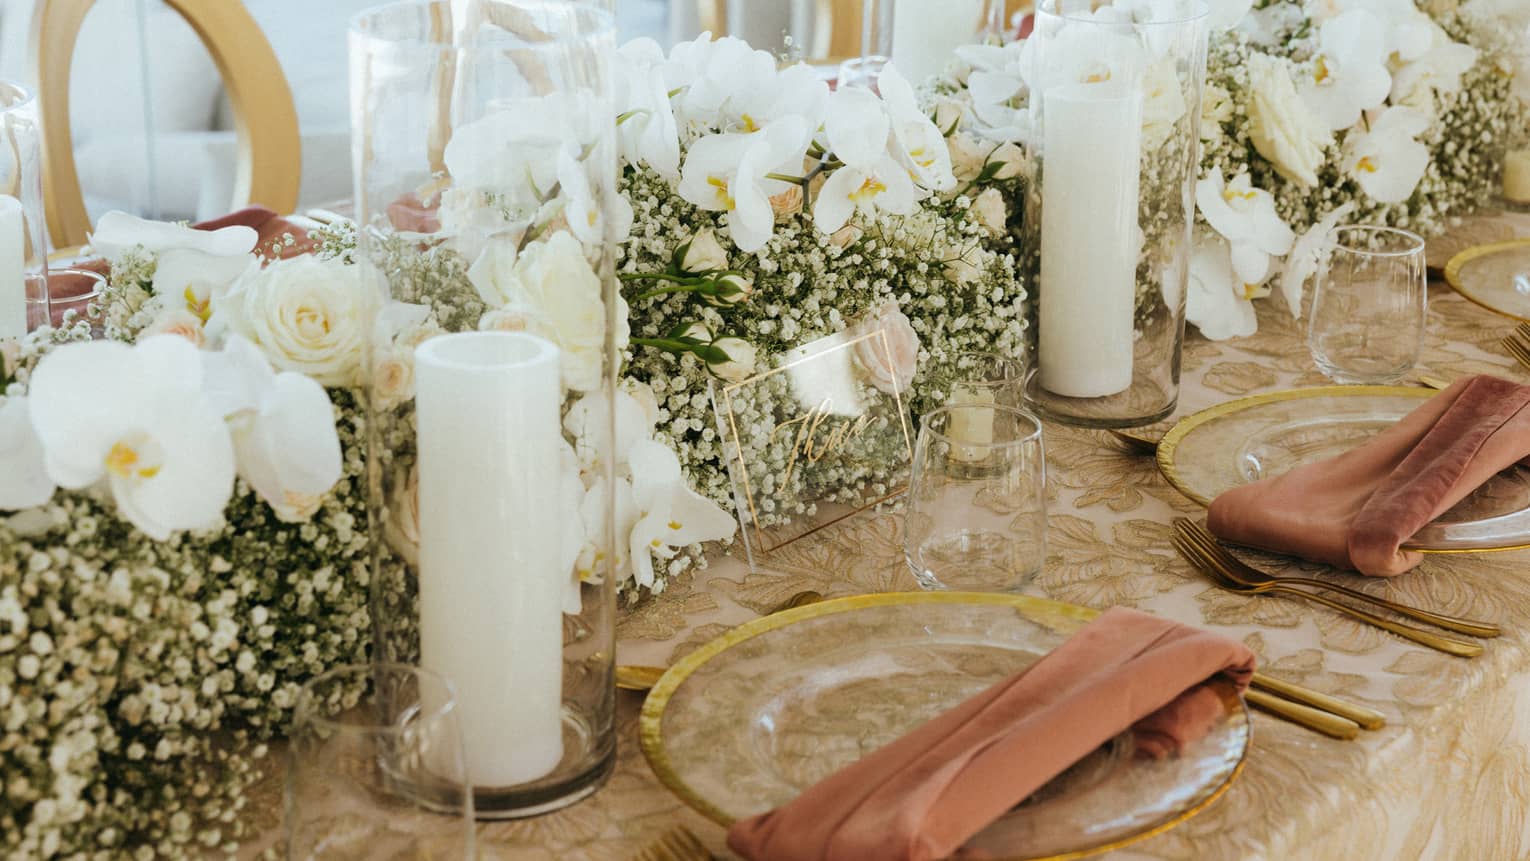 A large table with flower arrangements and candles along the center.